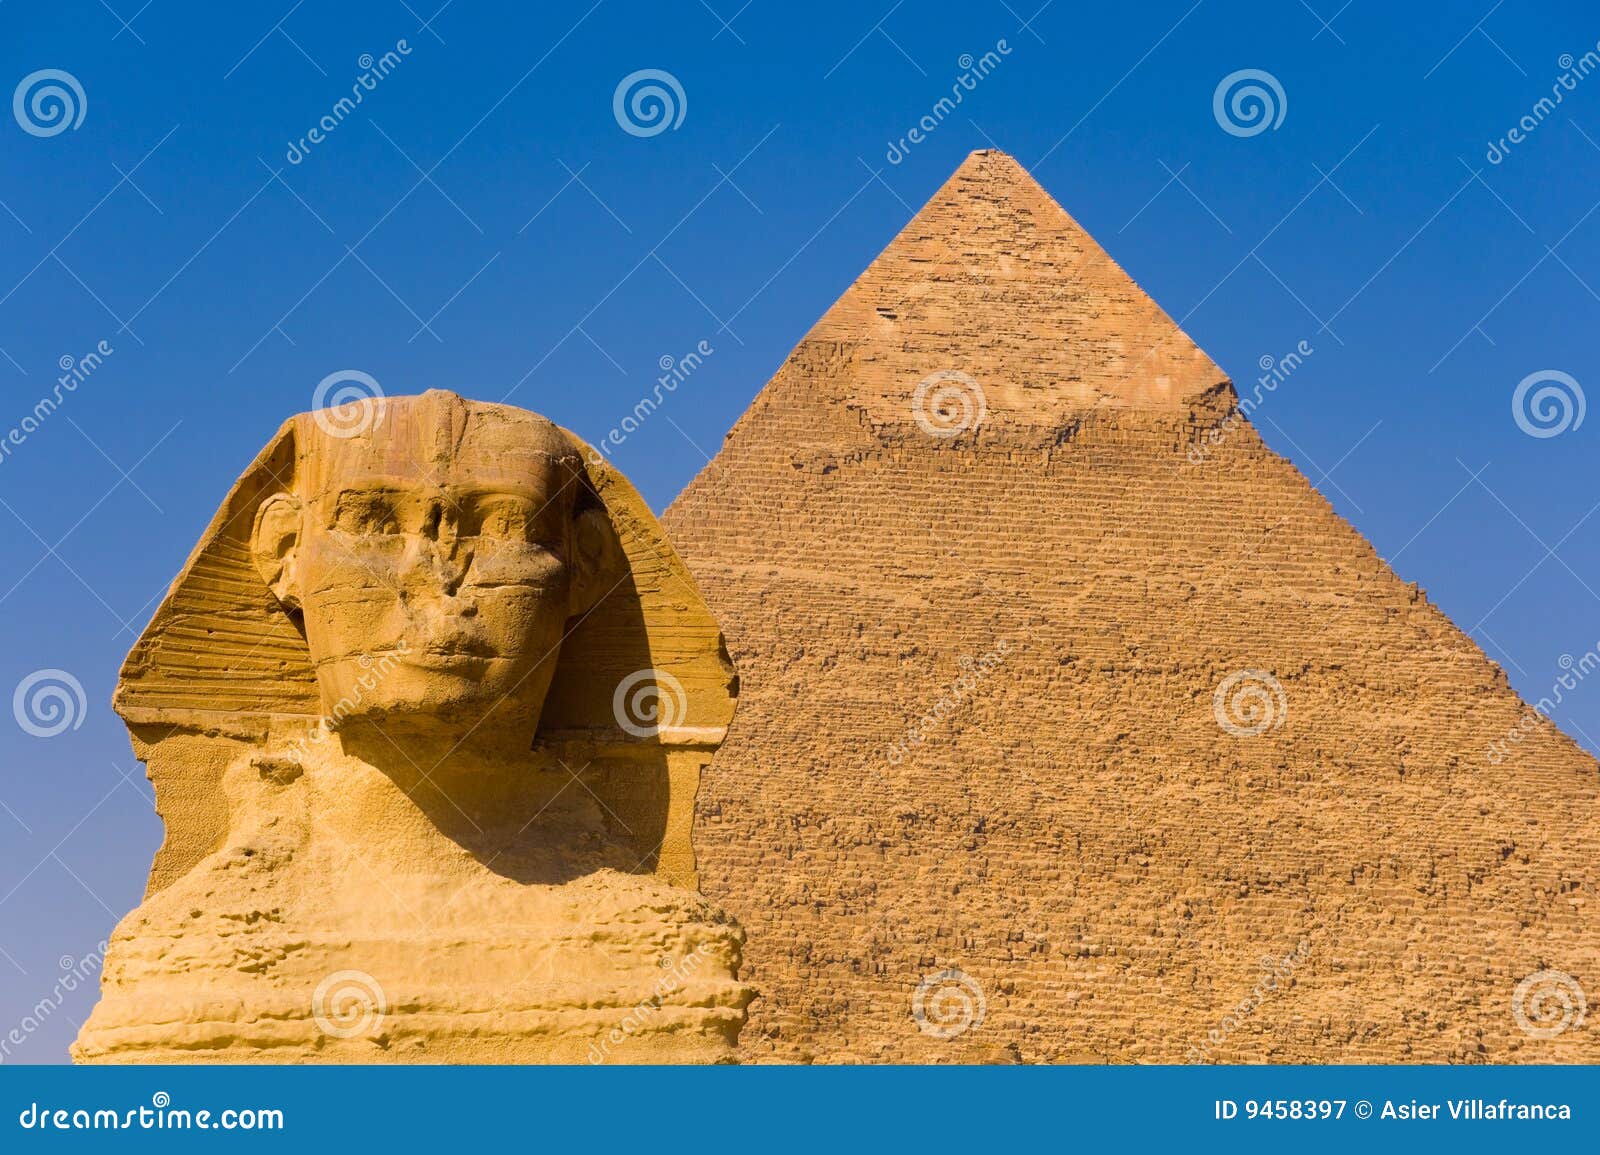 the sphinx and the great pyramid